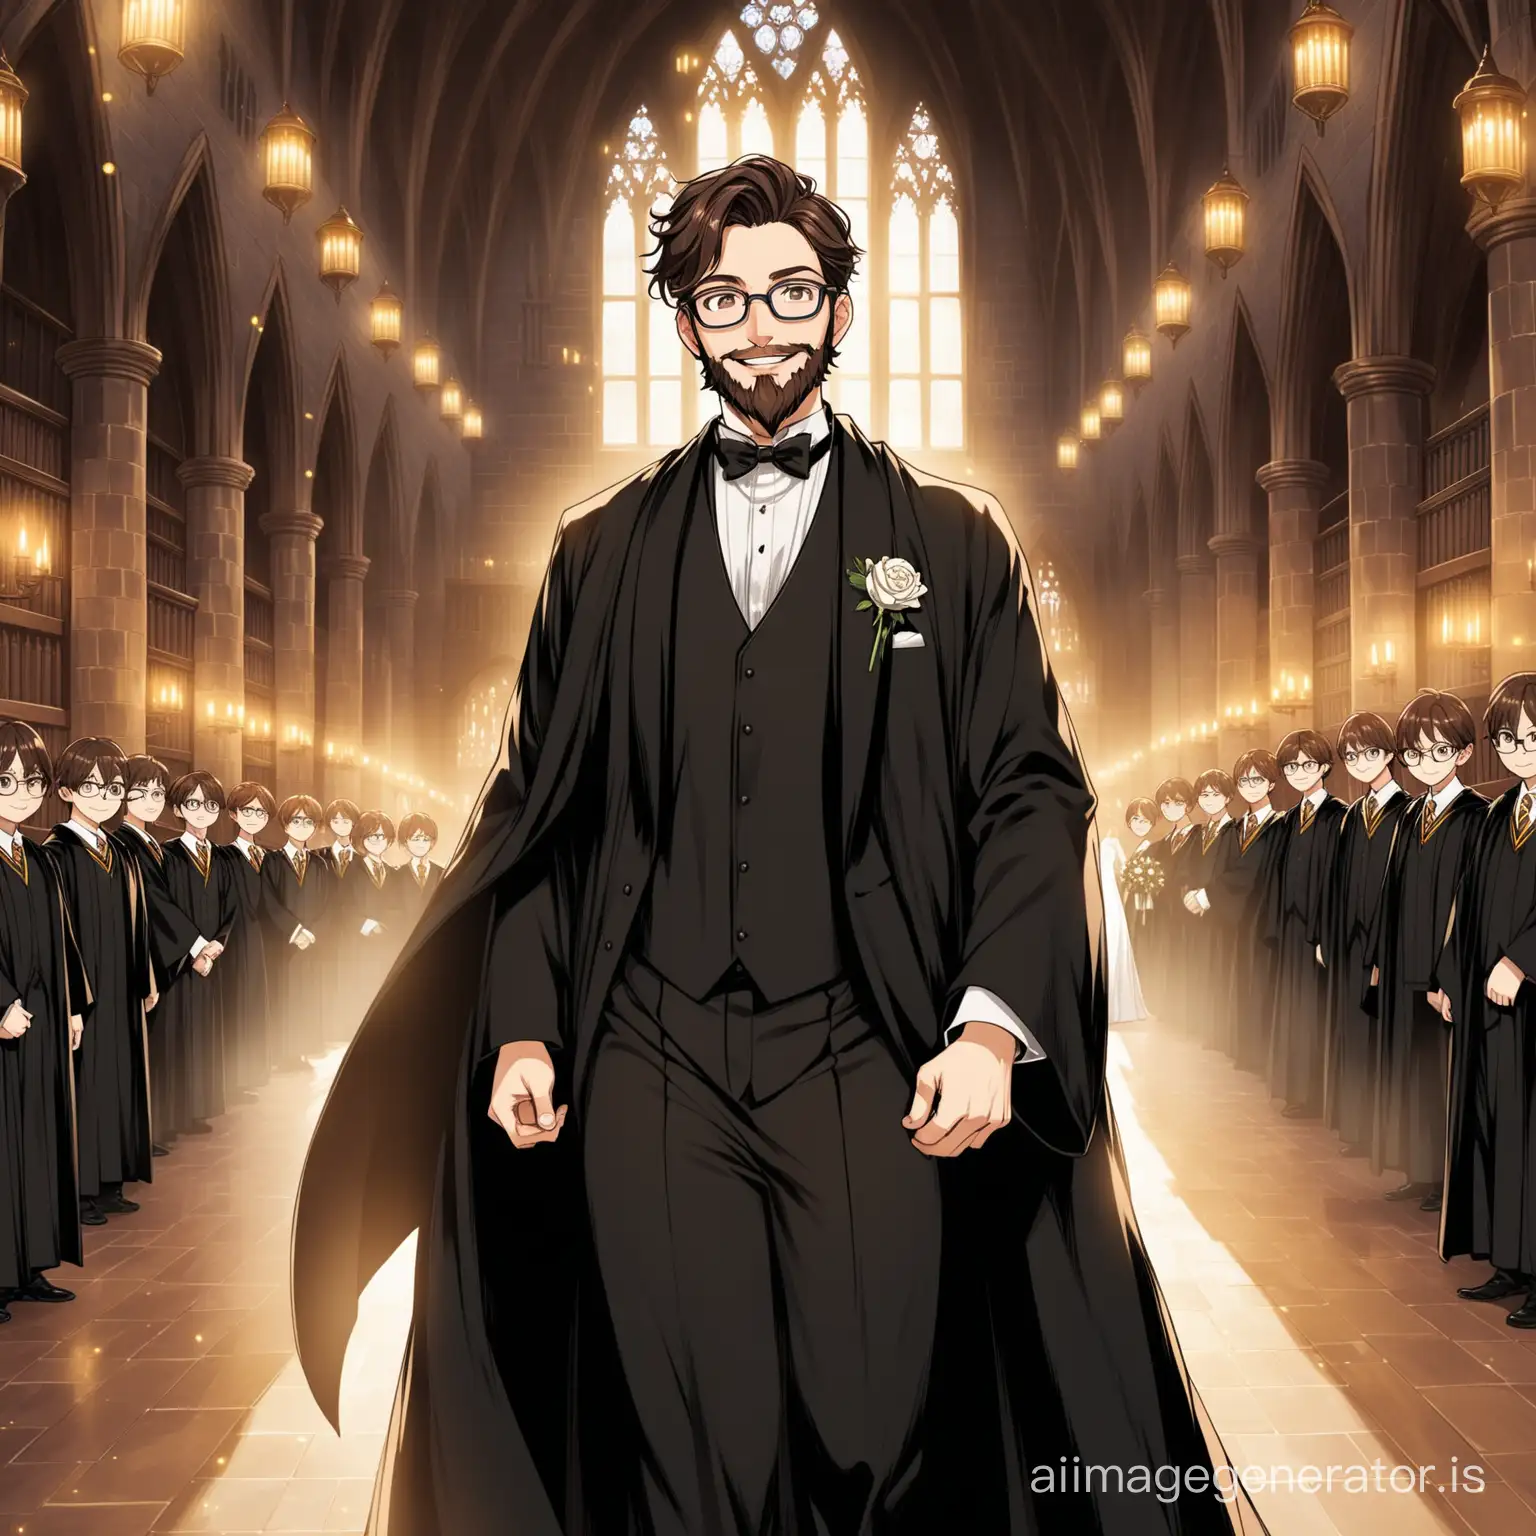 Anime styled happy man with short dark brown hair, with brown eyes and glasses, beard, wearing a wedding tux and Hogwarts black robes on top.